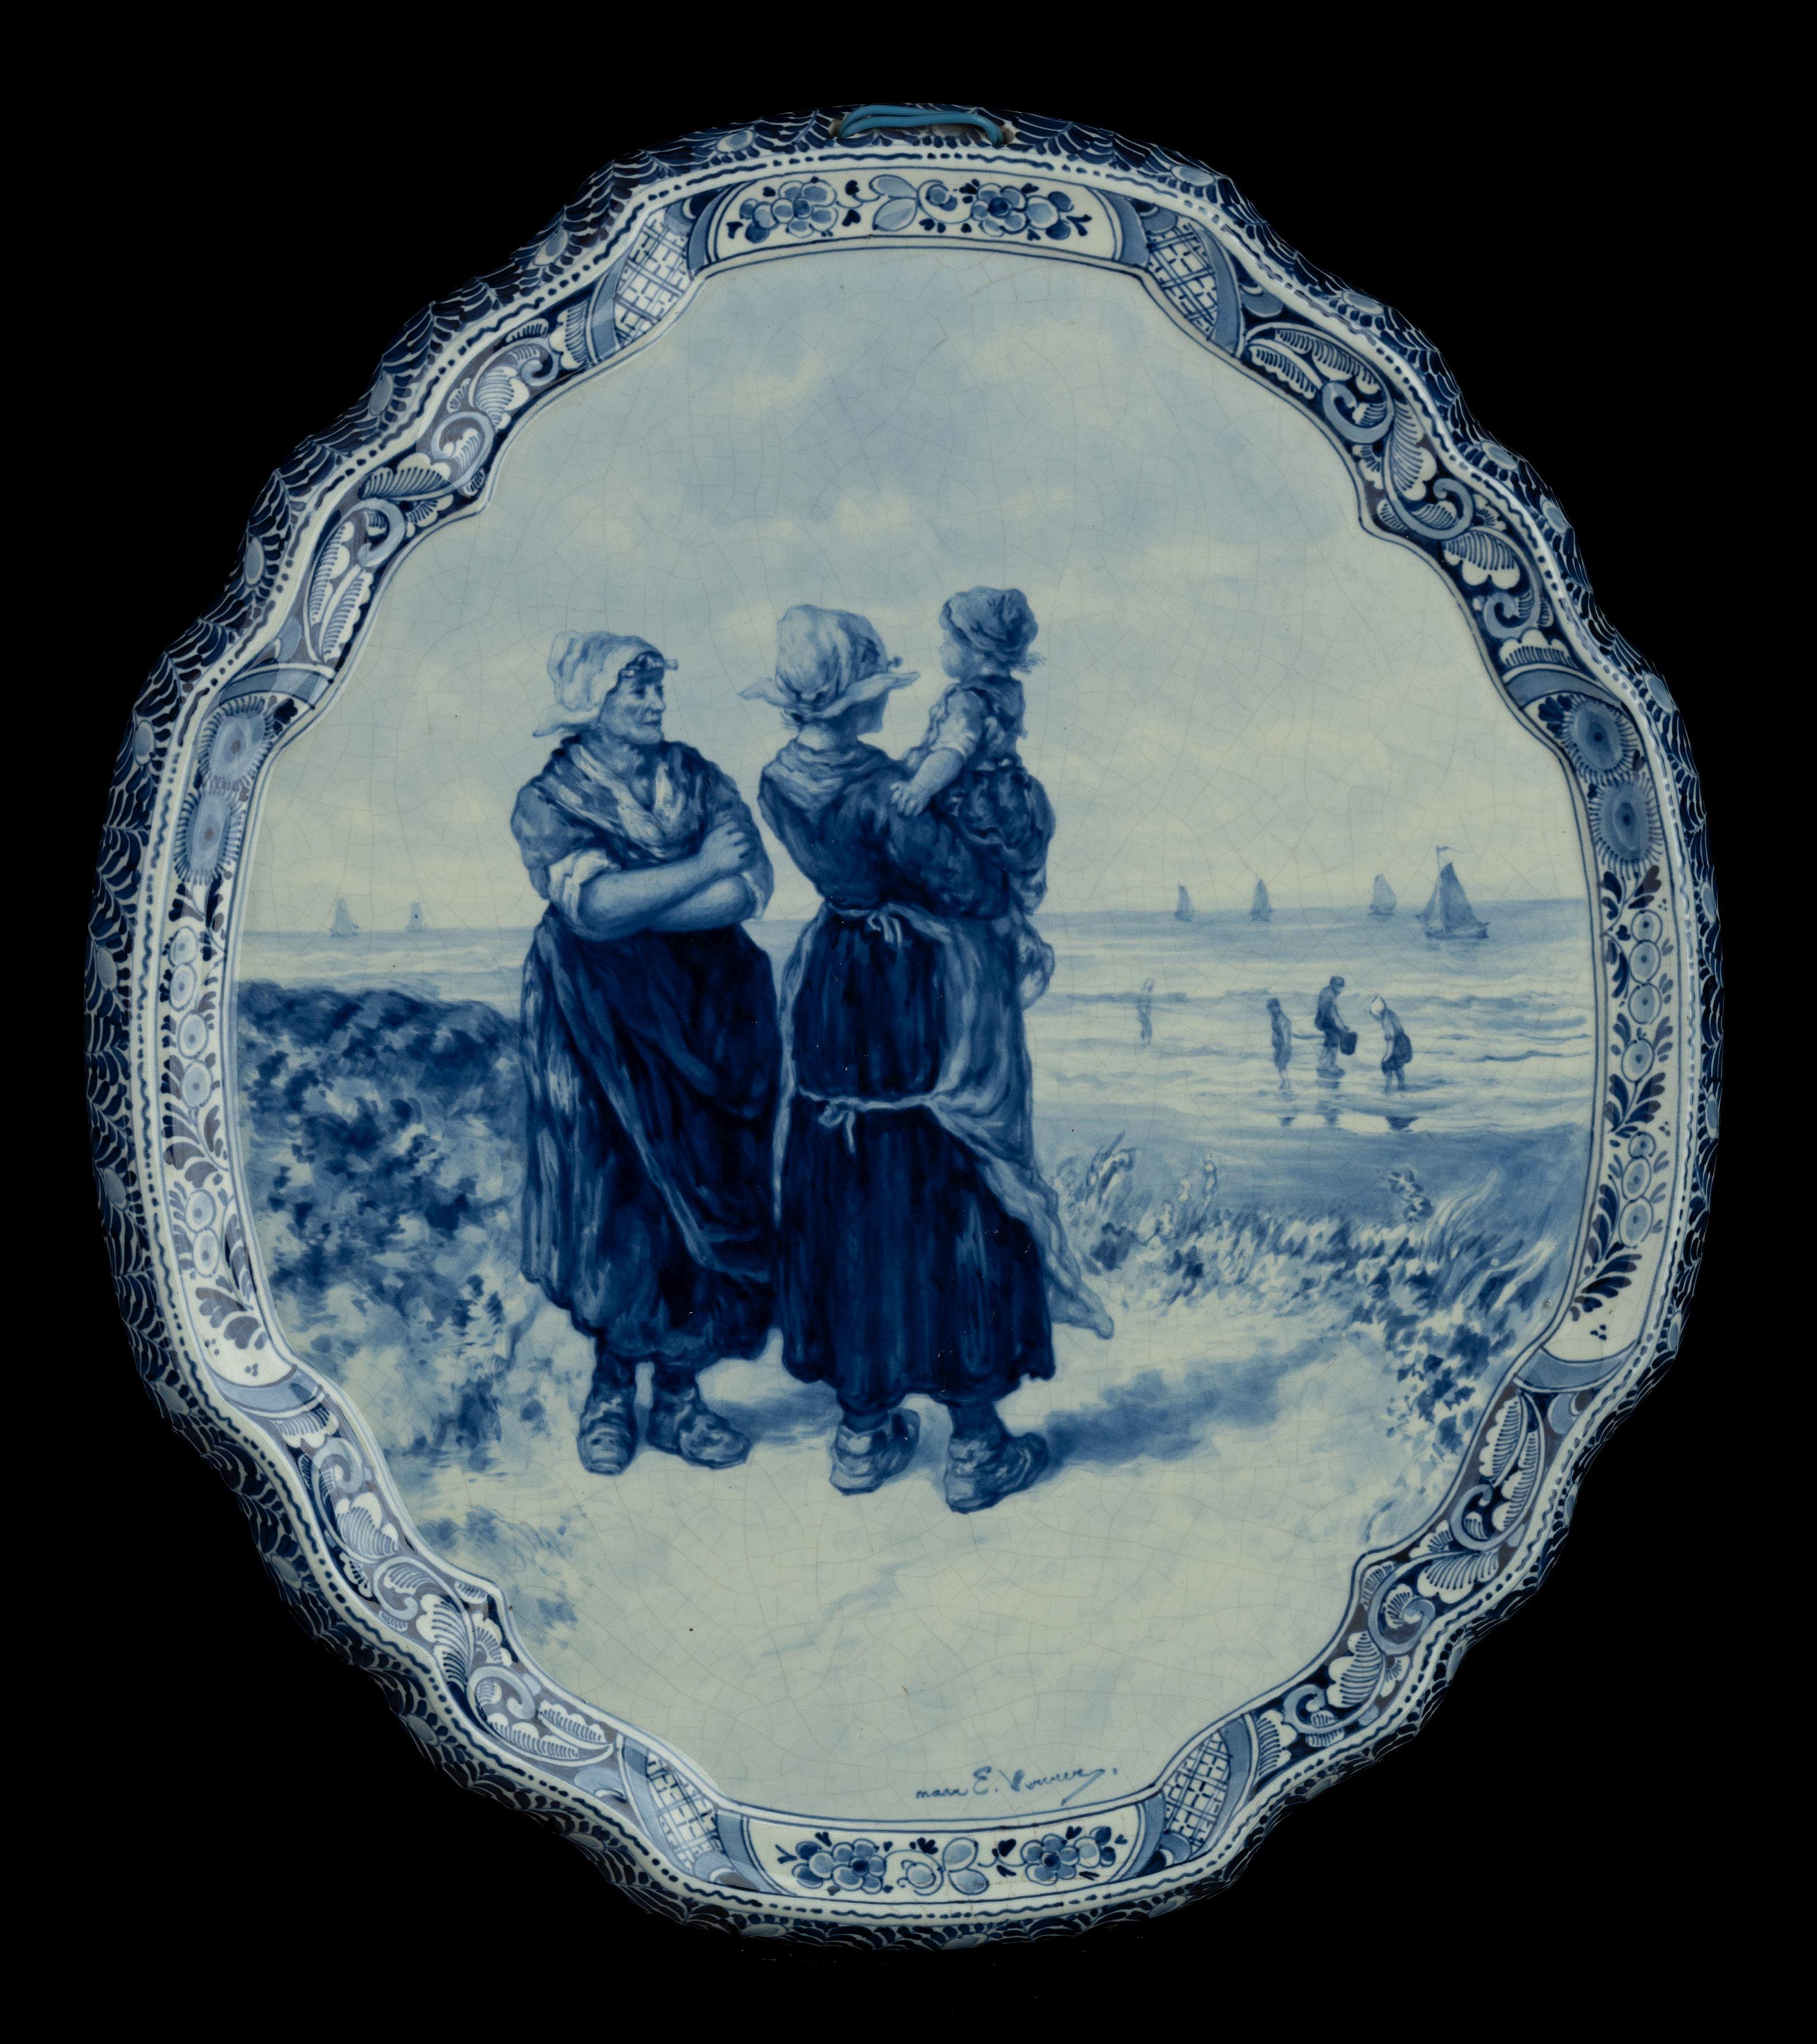 Delft, Porceleyne Fles Applique after a Painting by E. Verveer,  made 1901

A Porceleyne Fles delft hand painted applique after a painting by Elchanon Leonardus Verveer. . The applique is executed in Delft blue color and depicts two ladies with